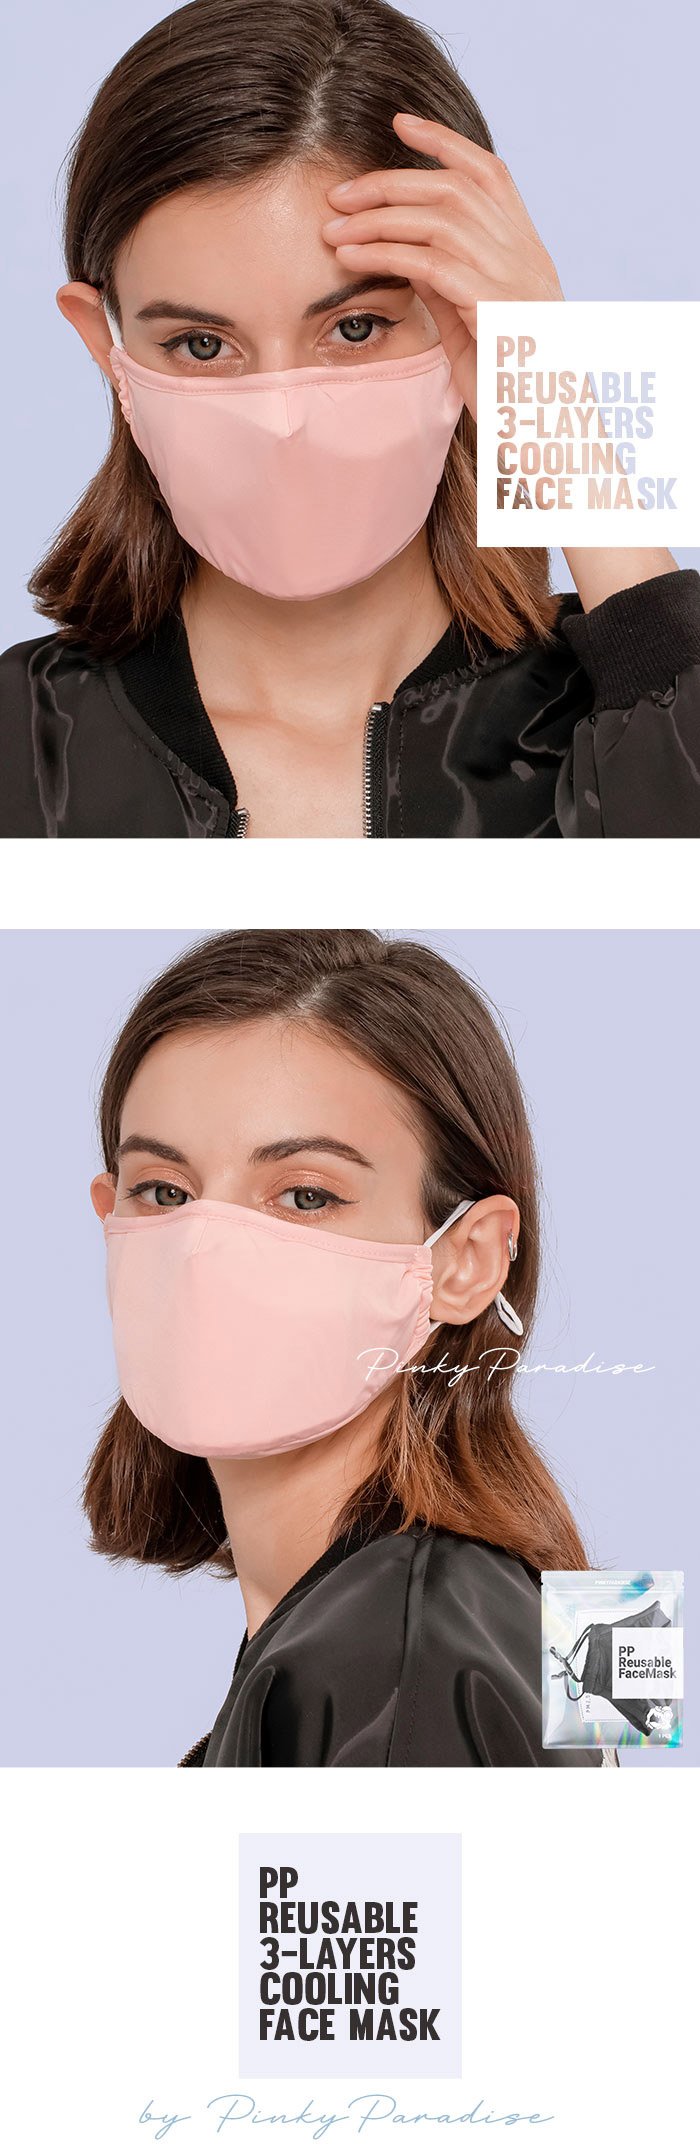 PP Reusable 3 layers Colling Face Mask in pink color